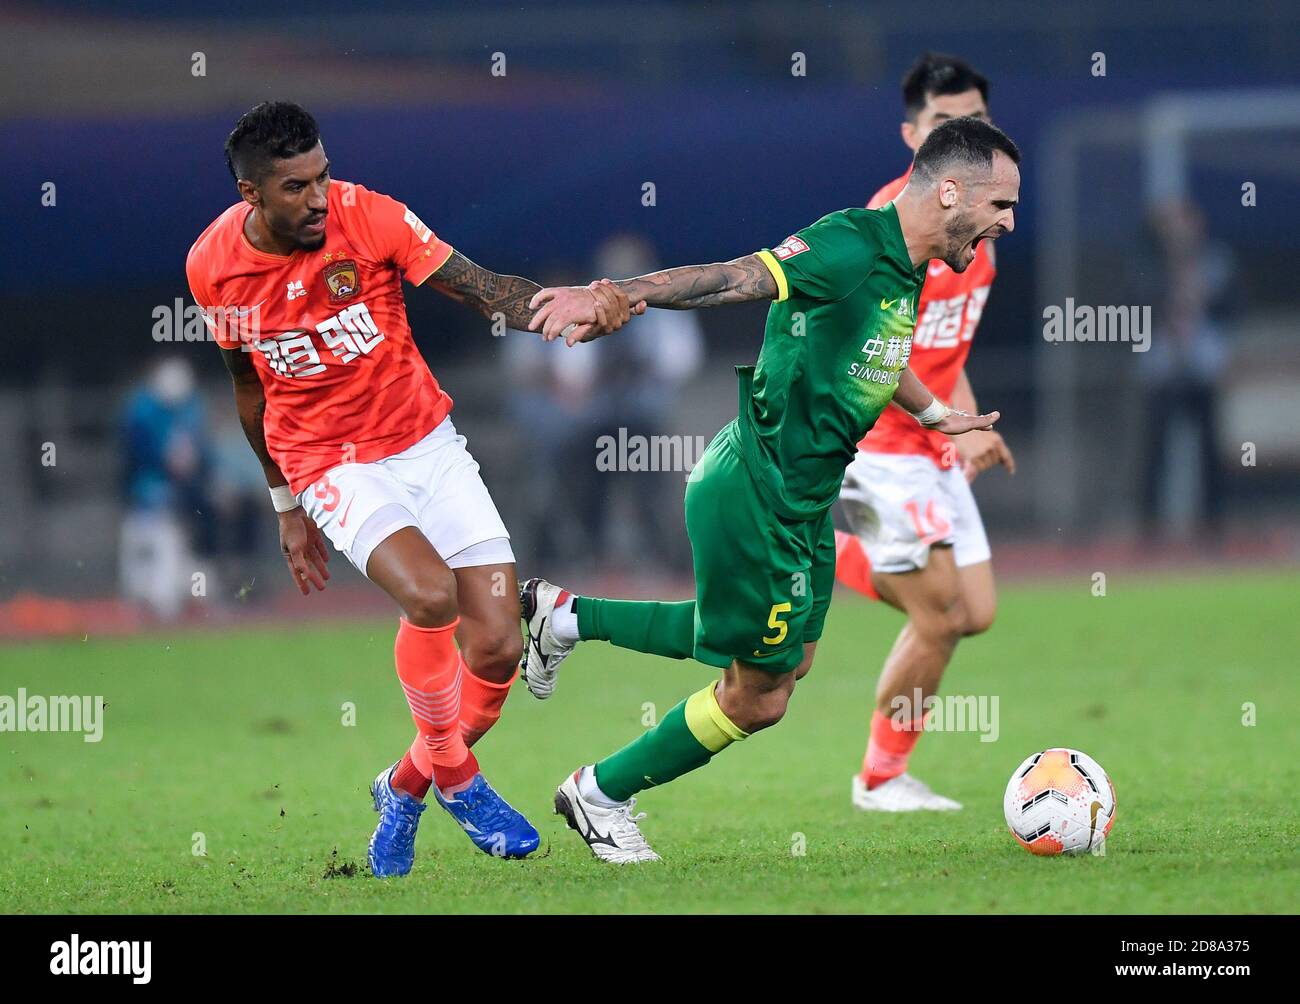 Suzhou, China's Jiangsu Province. 28th Oct, 2020. Renato Augusto (R) of Beijing Guoan is tackled during the 17th round match between Beijing Guoan and Guangzhou Evergrande Taobao at 2020 season Chinese Football Association Super League (CSL) Suzhou Division in Suzhou, east China's Jiangsu Province, Oct. 28, 2020. Credit: Xu Chang/Xinhua/Alamy Live News Stock Photo